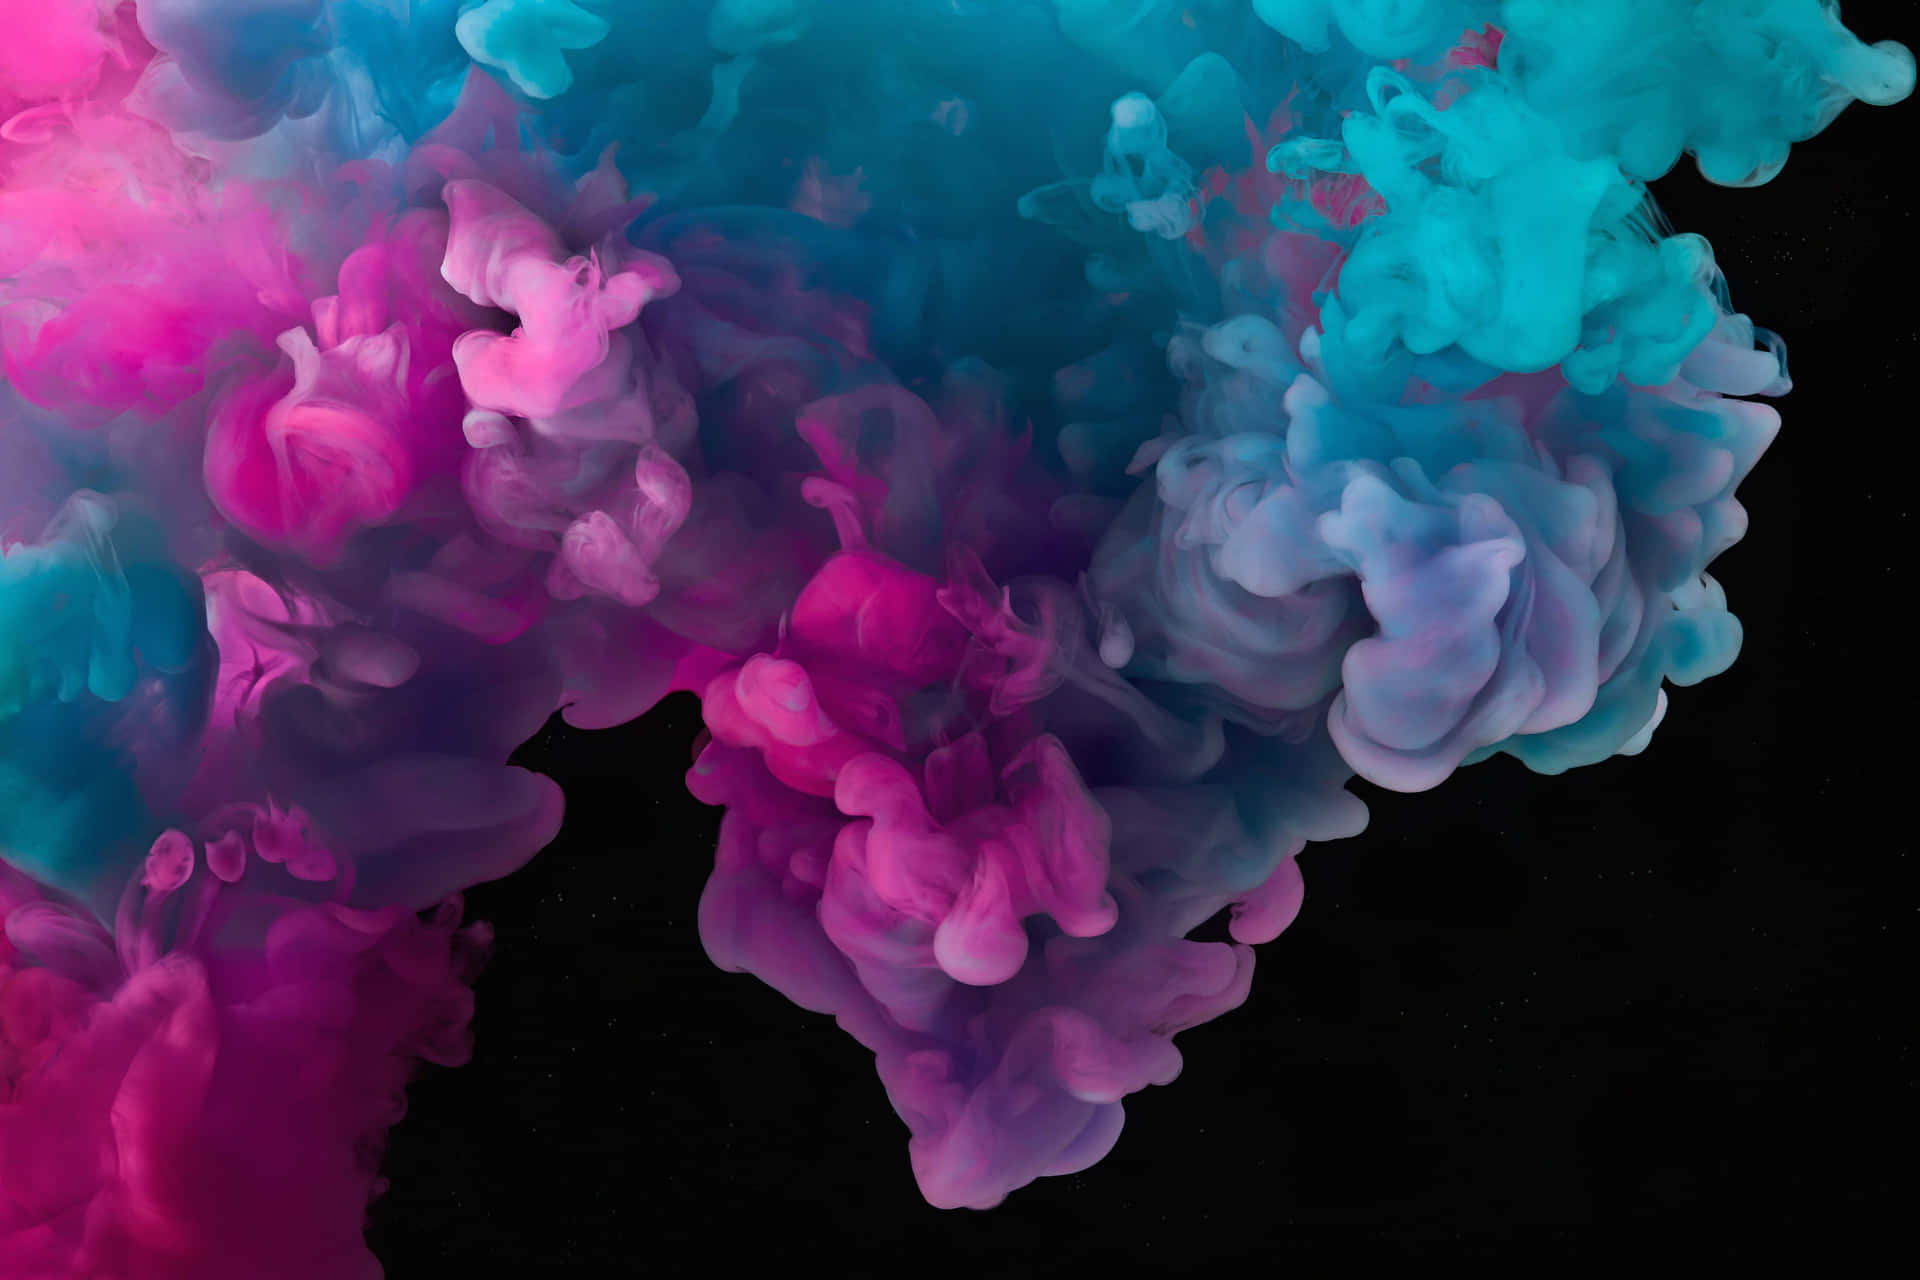 Intriguing clouds of colorful smoke